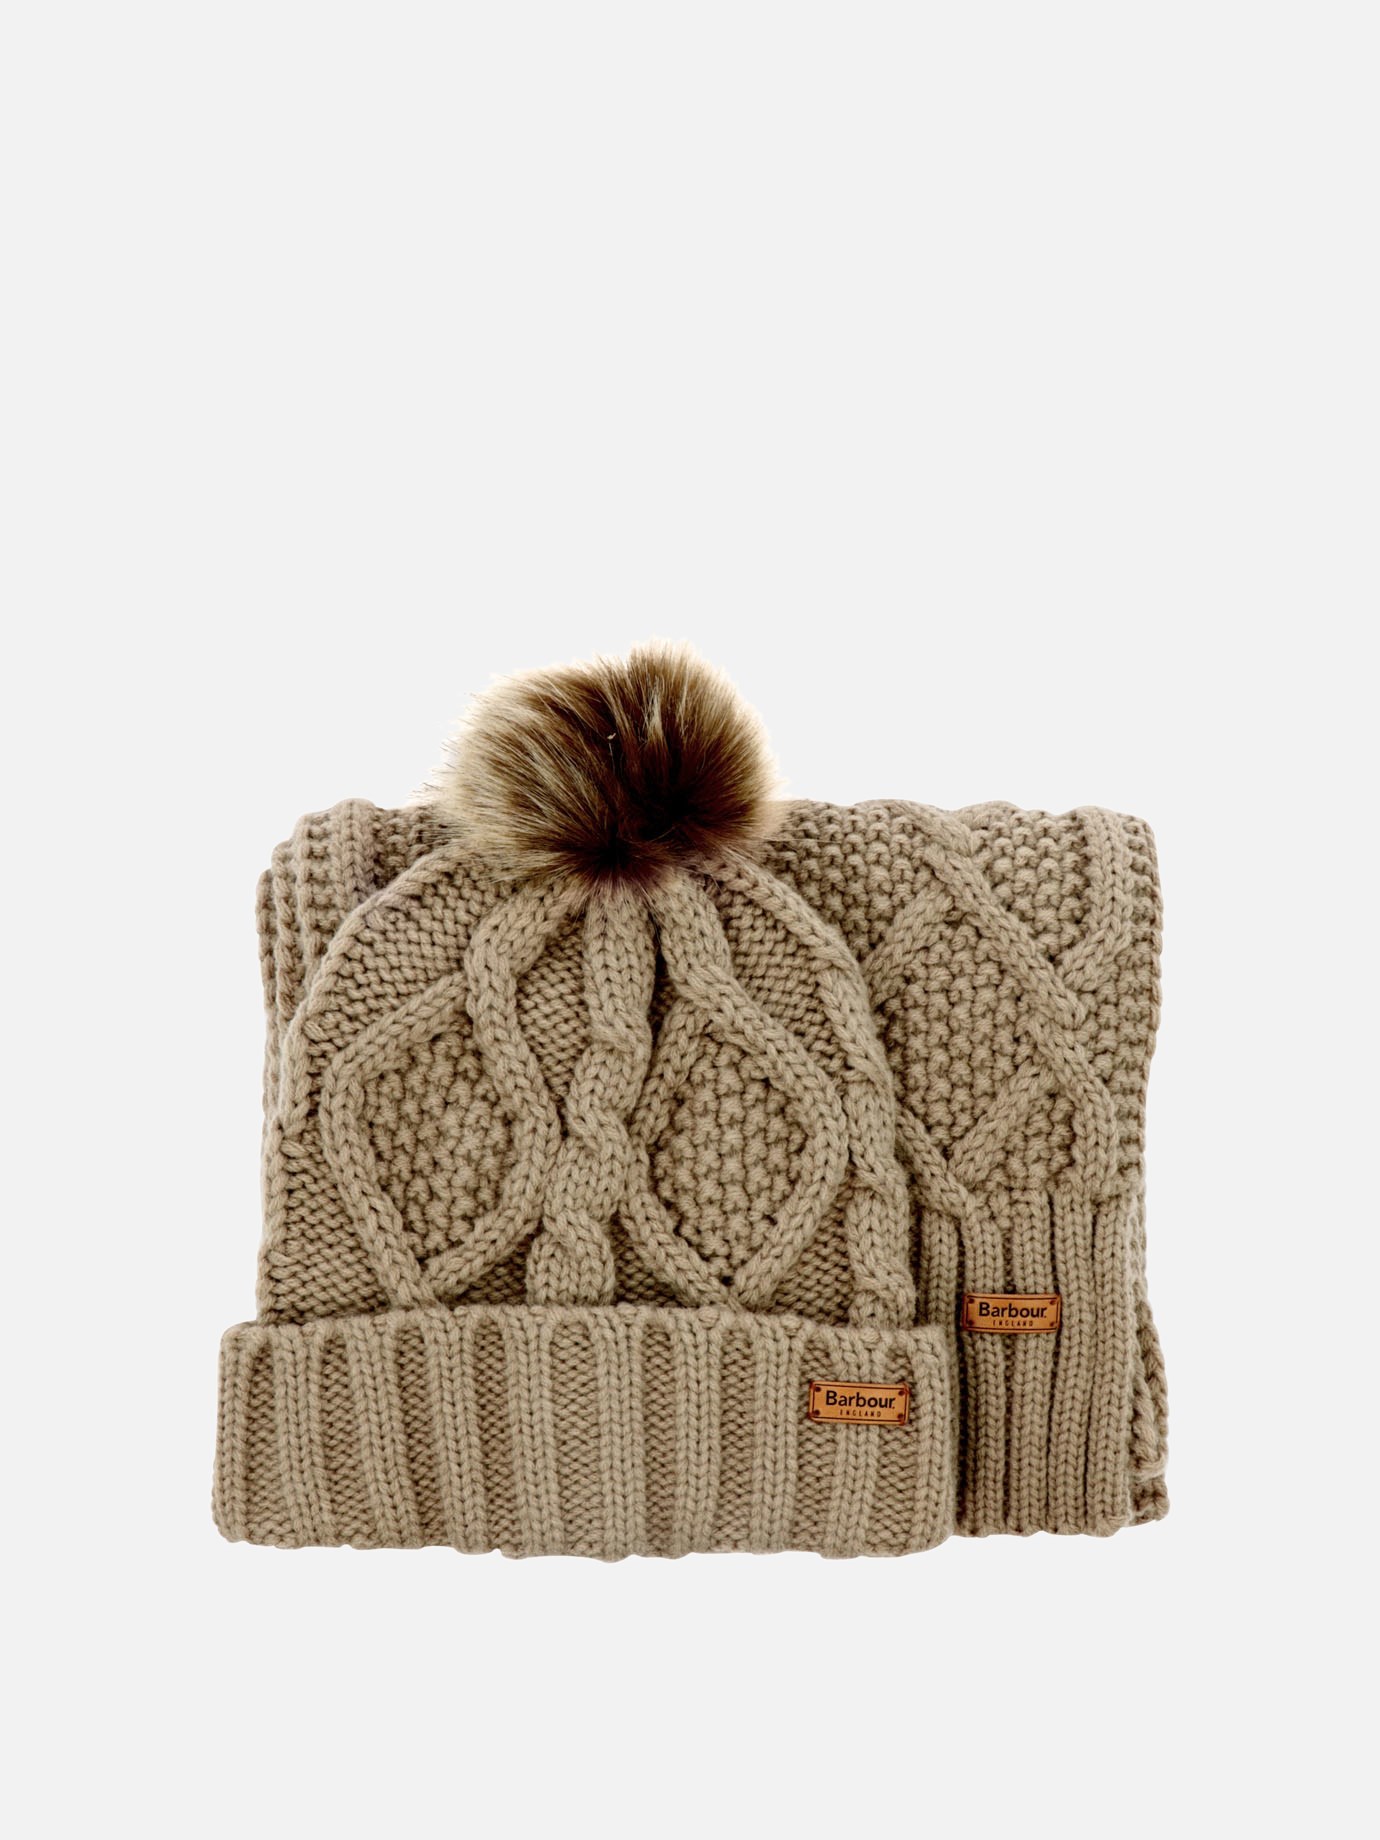  Ridley  beanie and scarf setby Barbour - 1